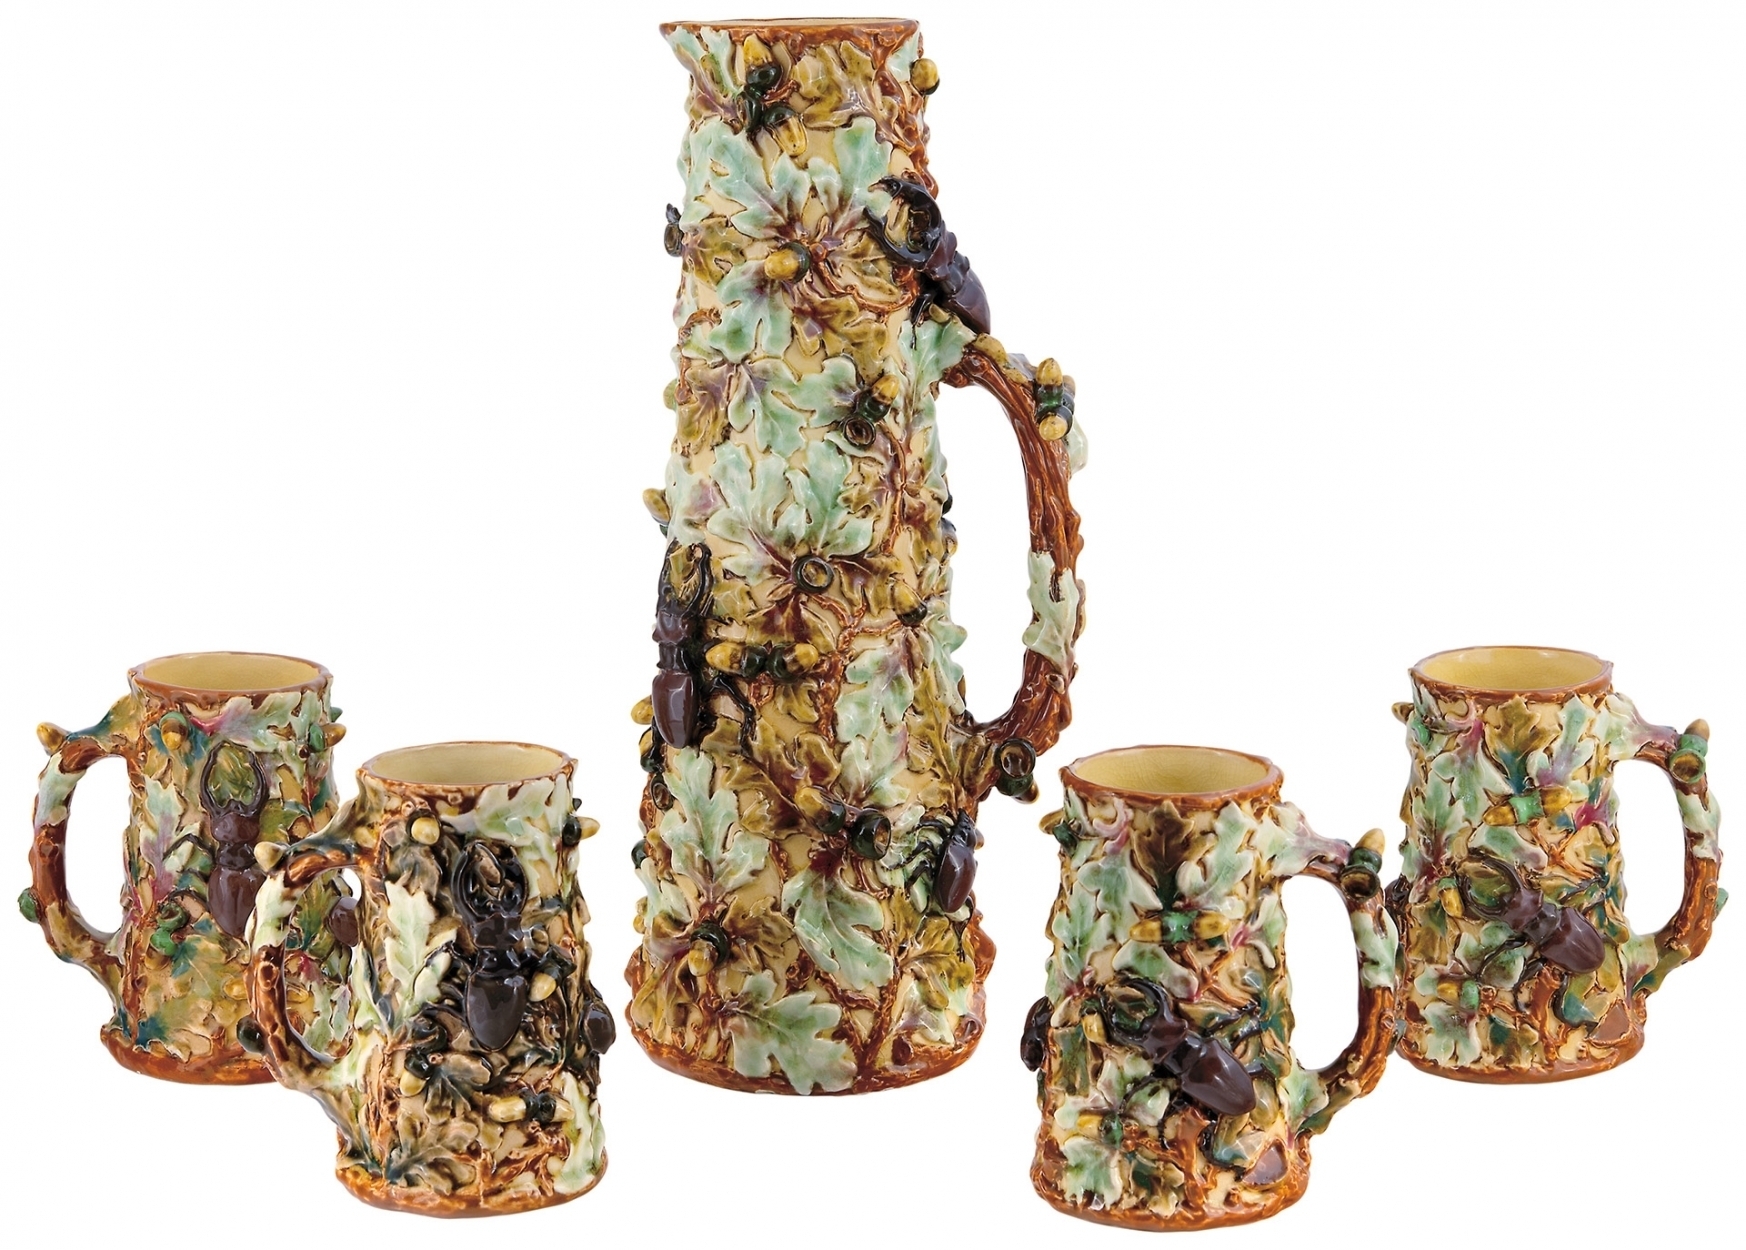 Zsolnay Decor Jug with Four Cups in Palissy Style, around 1893